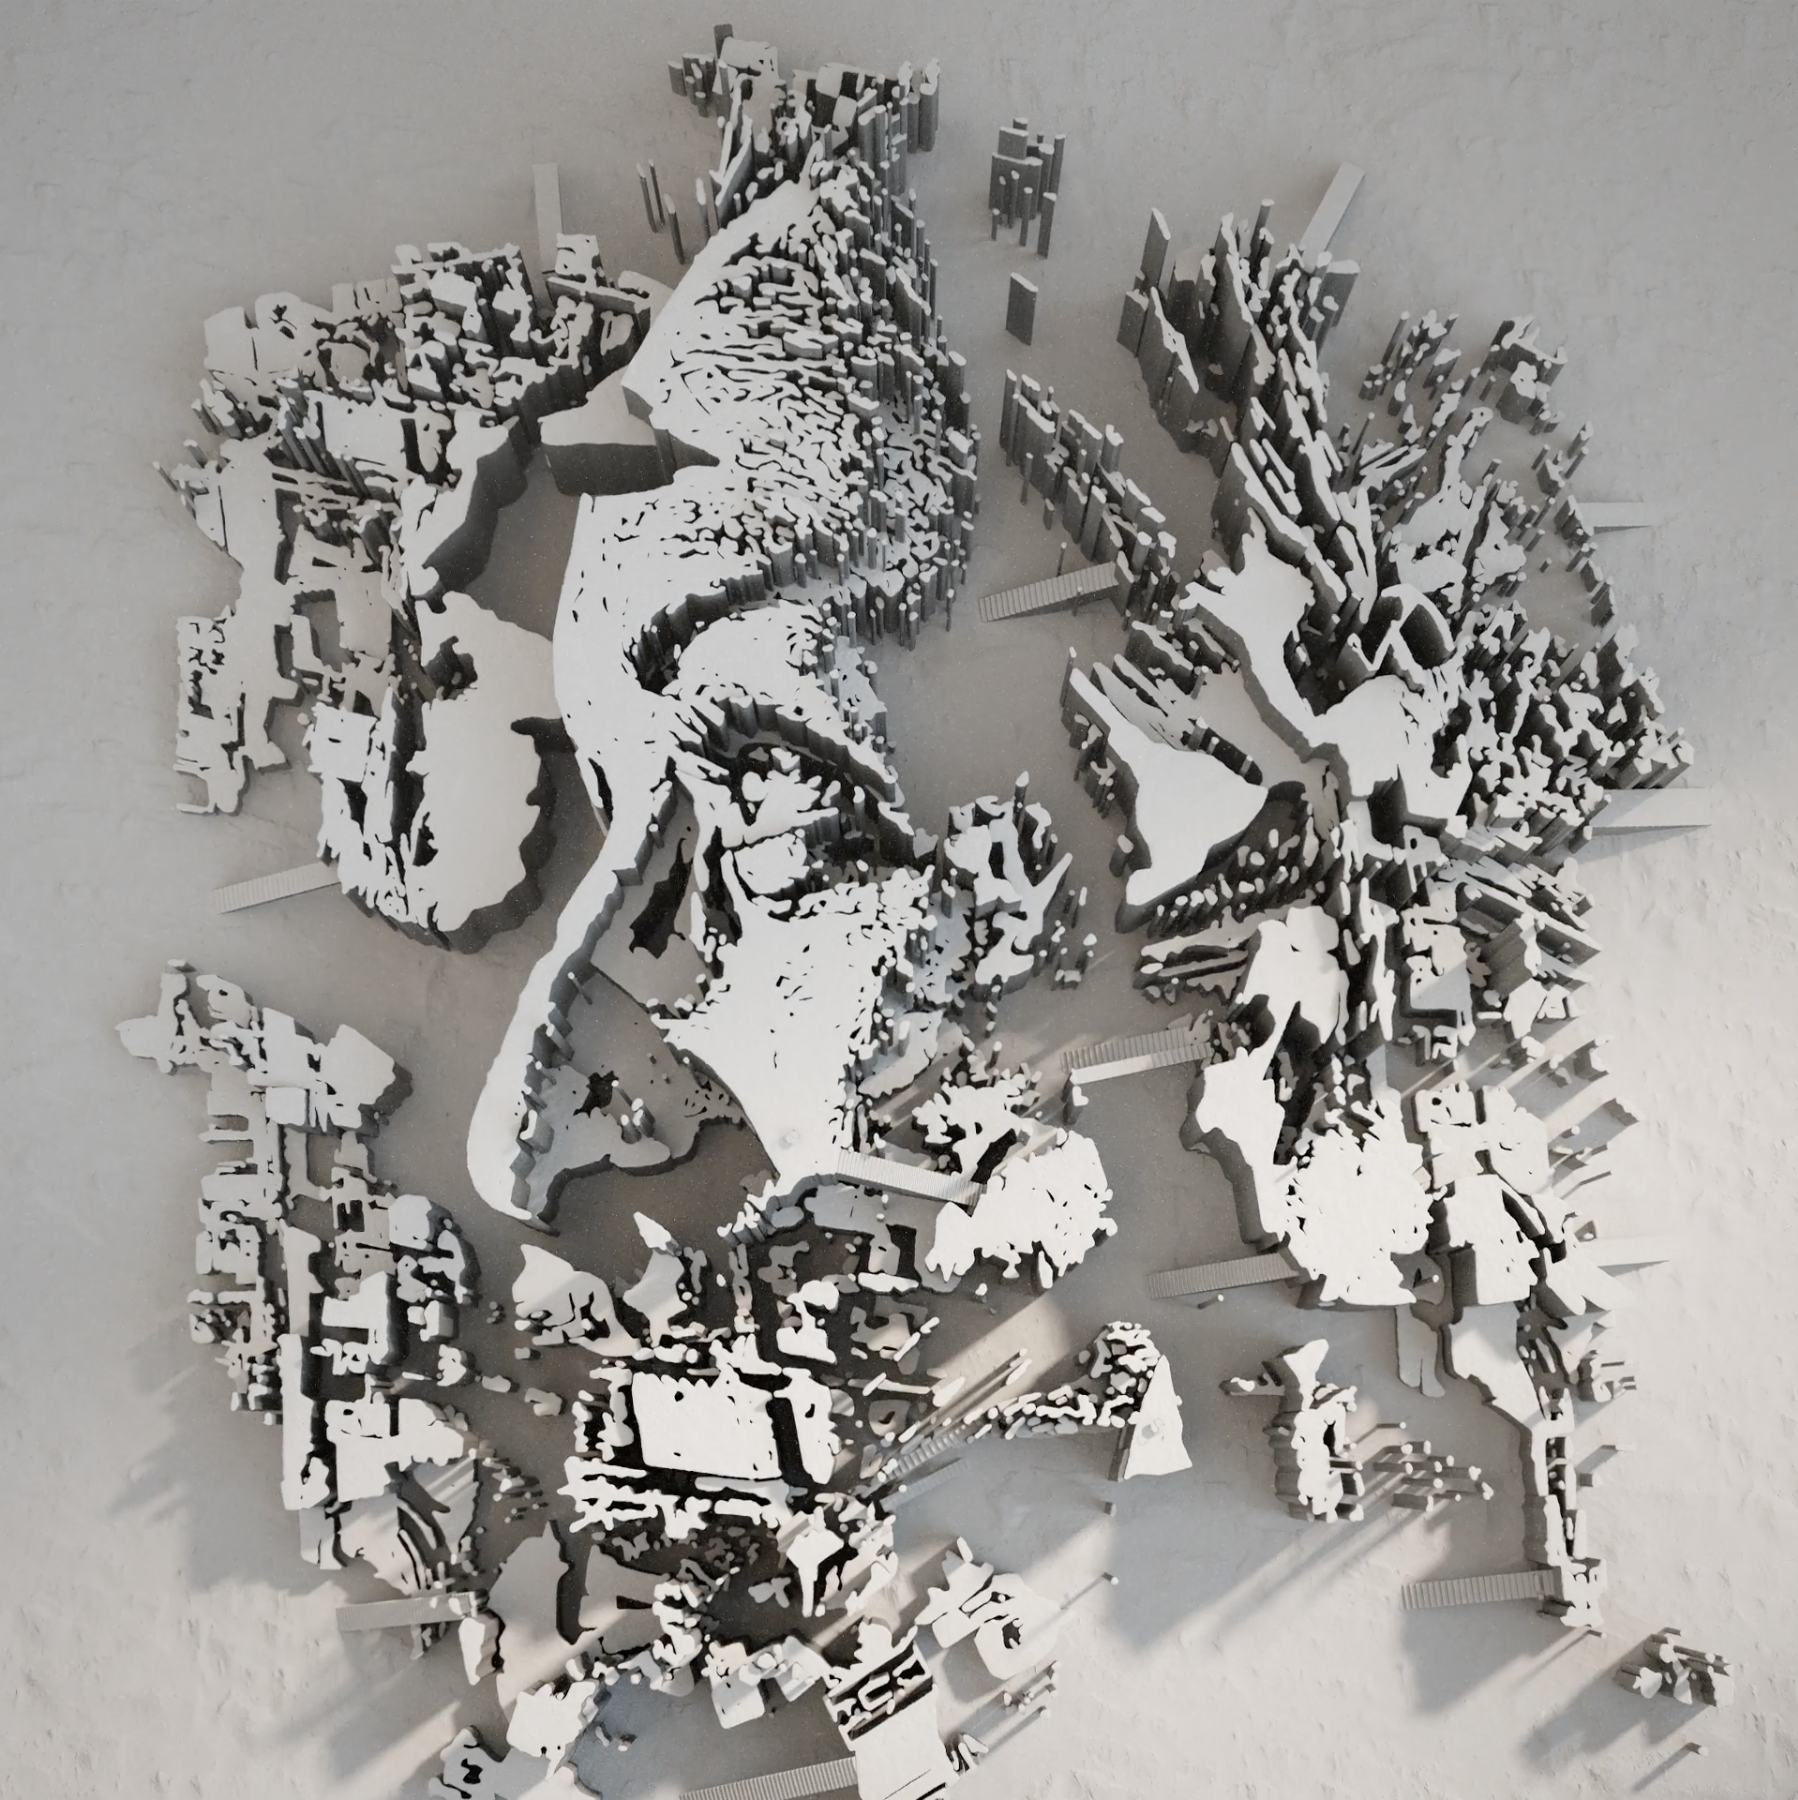 33 Curated Drop Open Edition featuring Vhils and Six N. Five